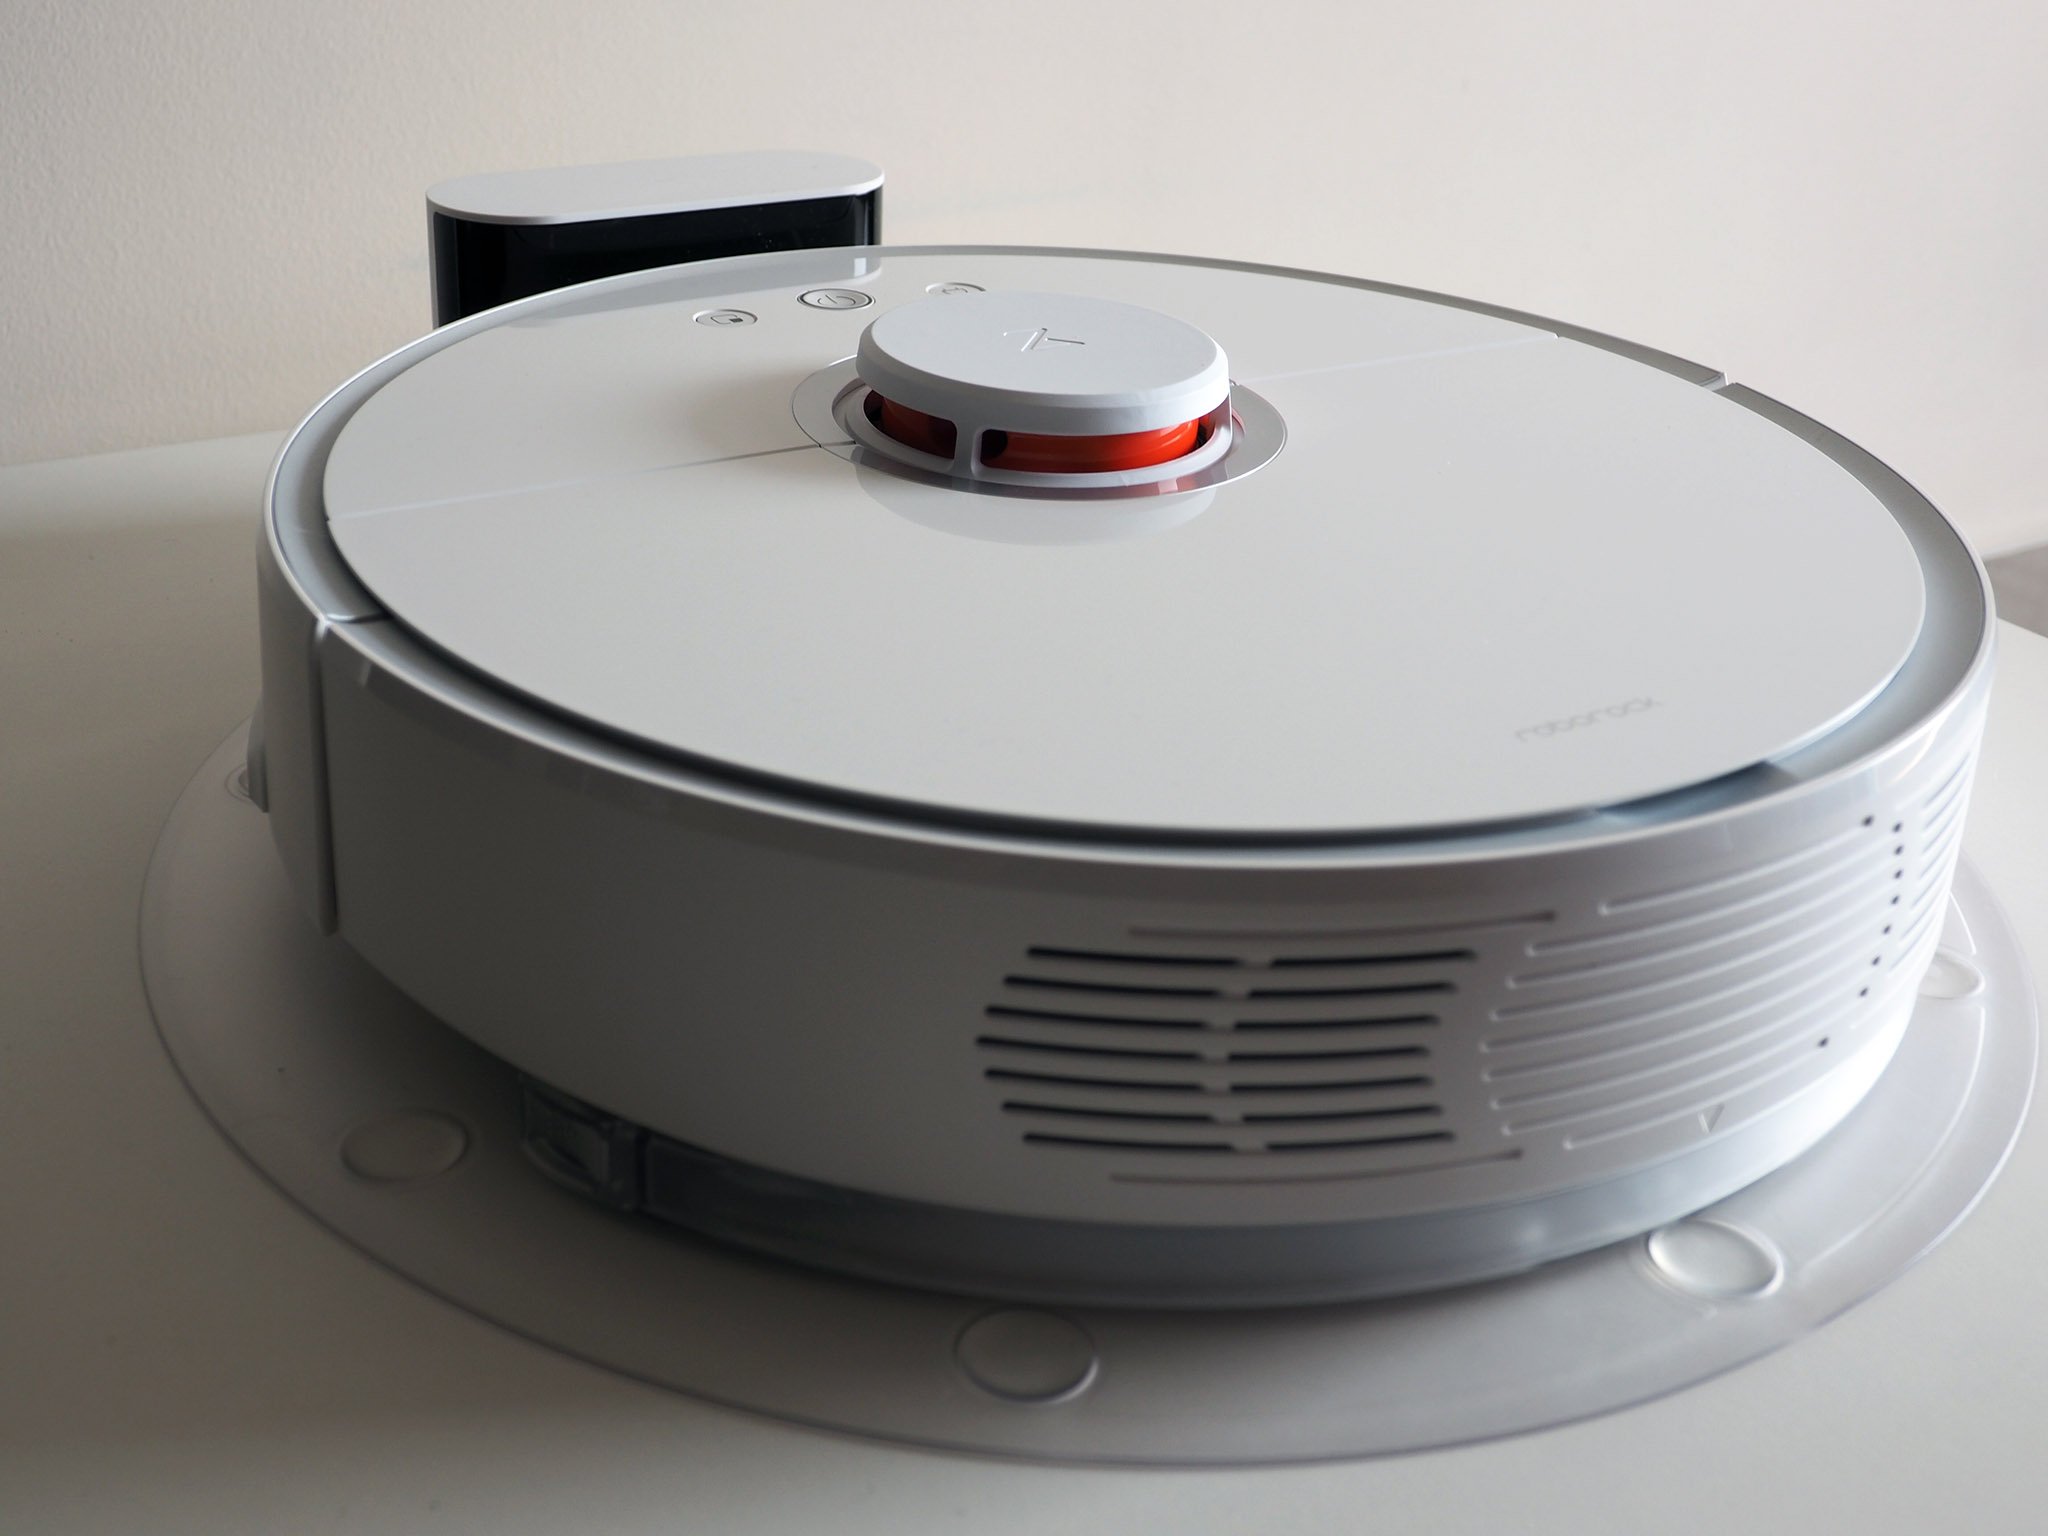 Xiaomi Mi Robot Vacuum Cleaner review: A worthy upgrade ...